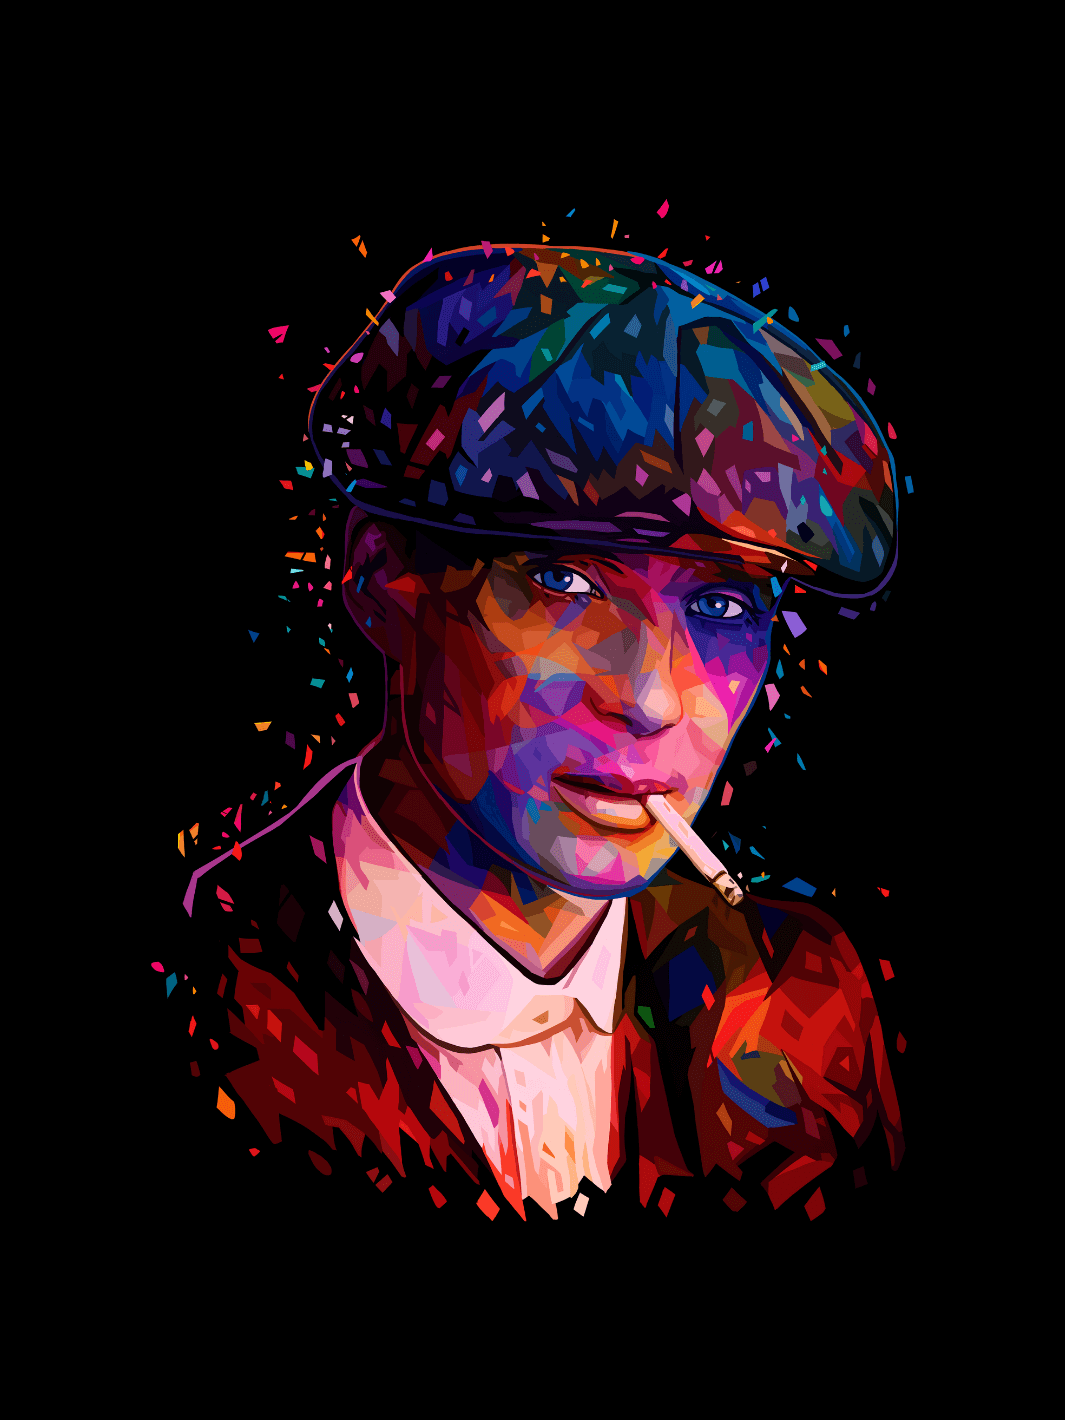 Grafica di Peaky Blinders by Alessandro Pautasso.